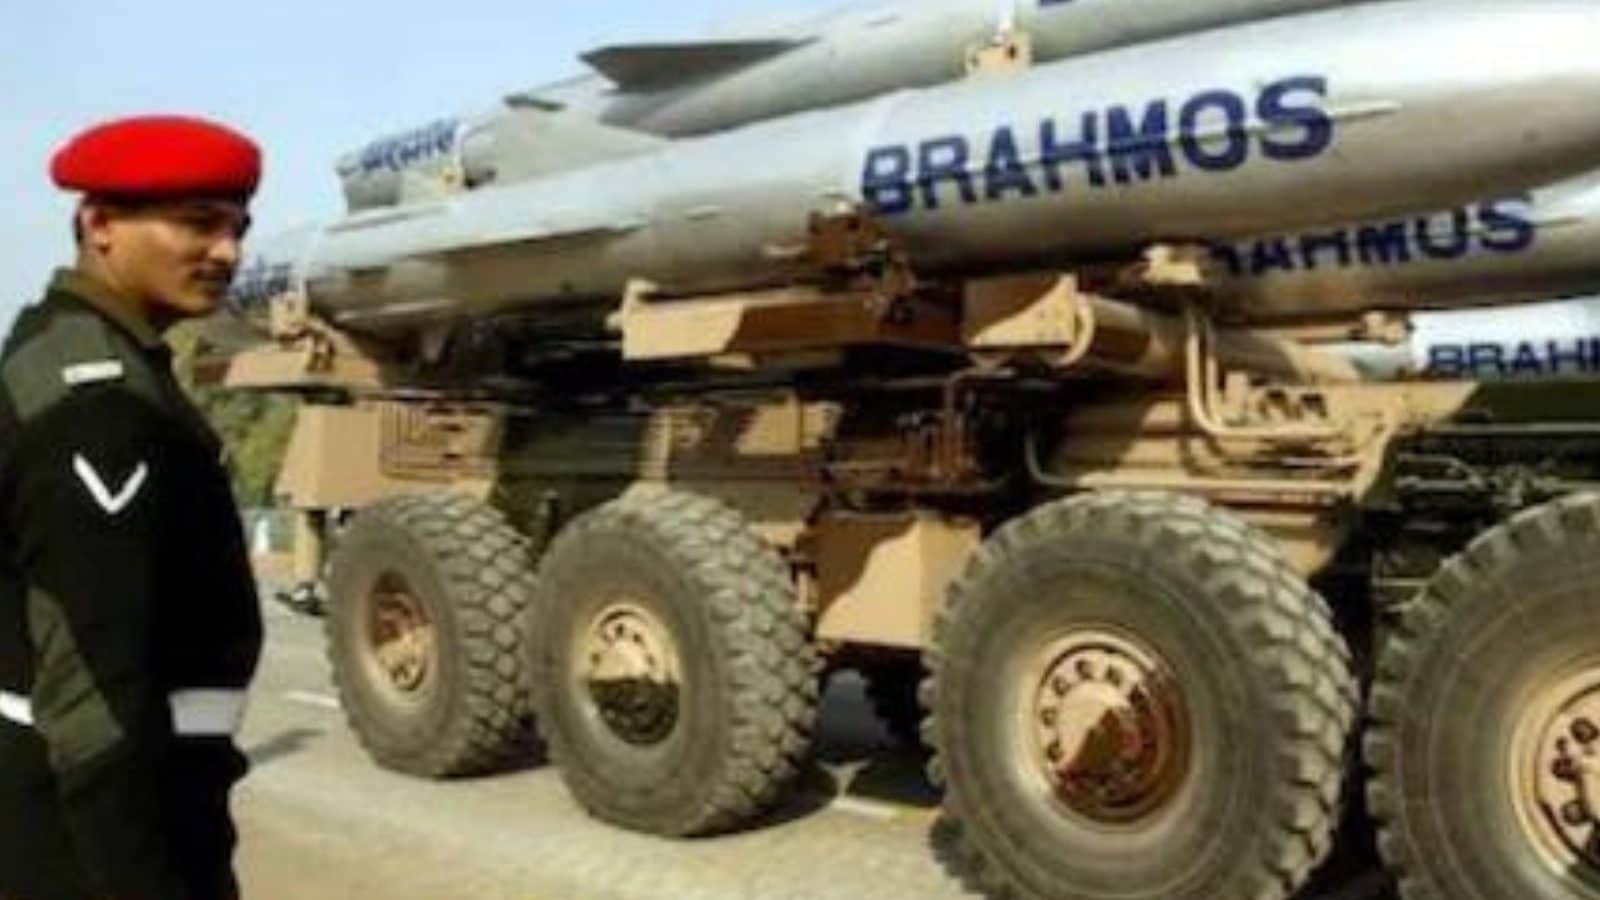 EXPLAINED: As Philippines Eyes BrahMos Deal, A Look At The Missile And India's Defence Exports Game